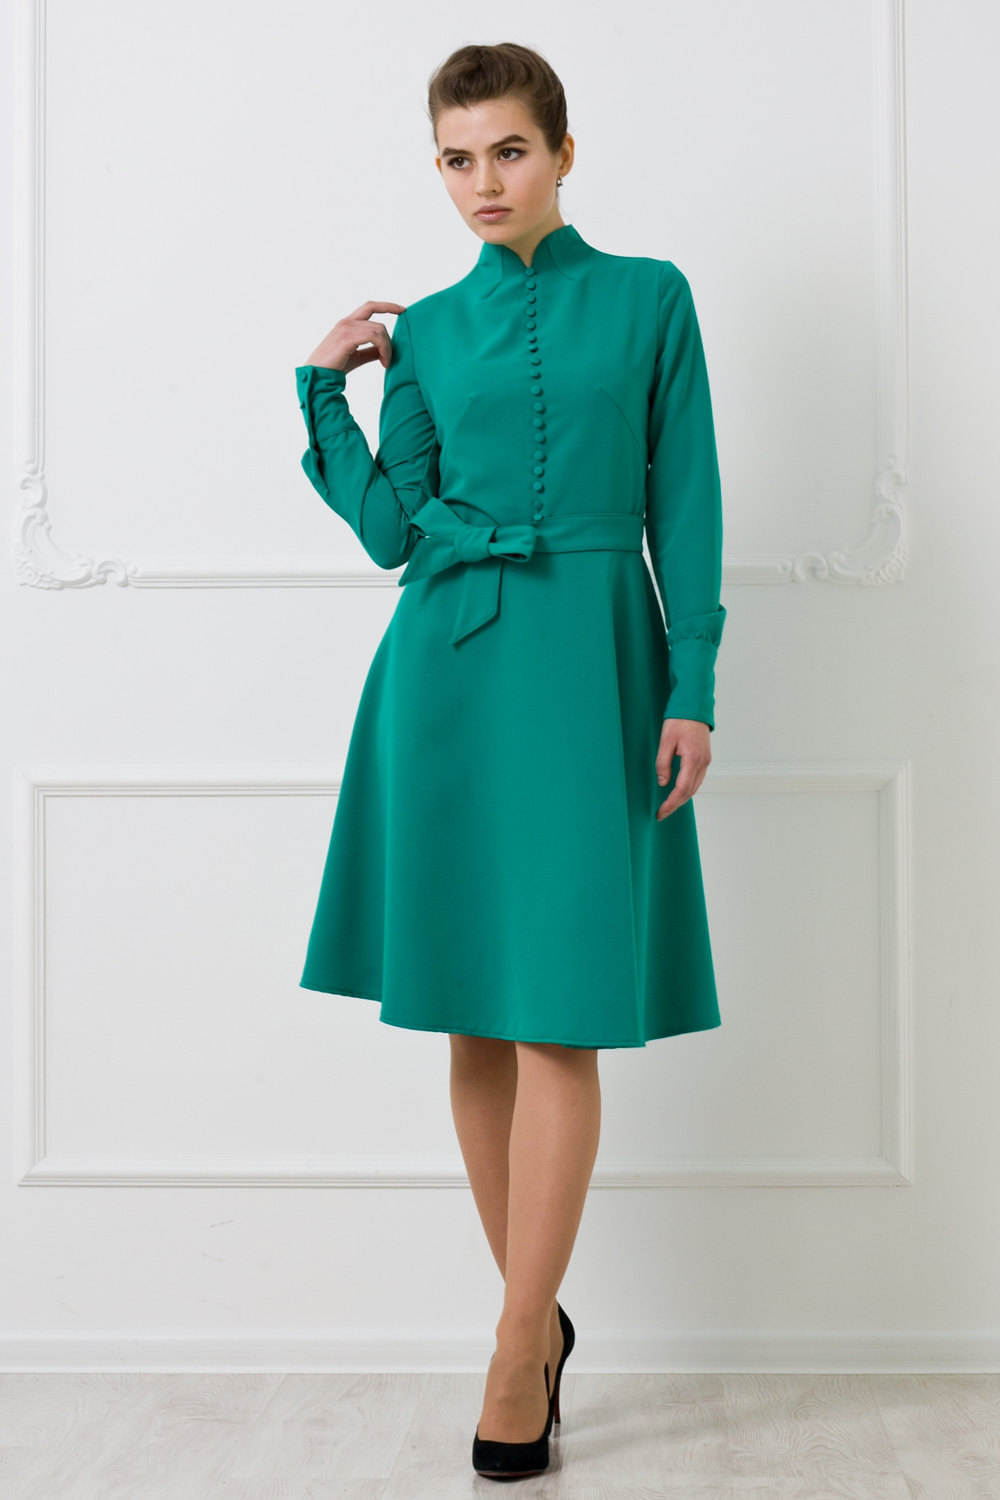 Green high neck button front fit and flare dress